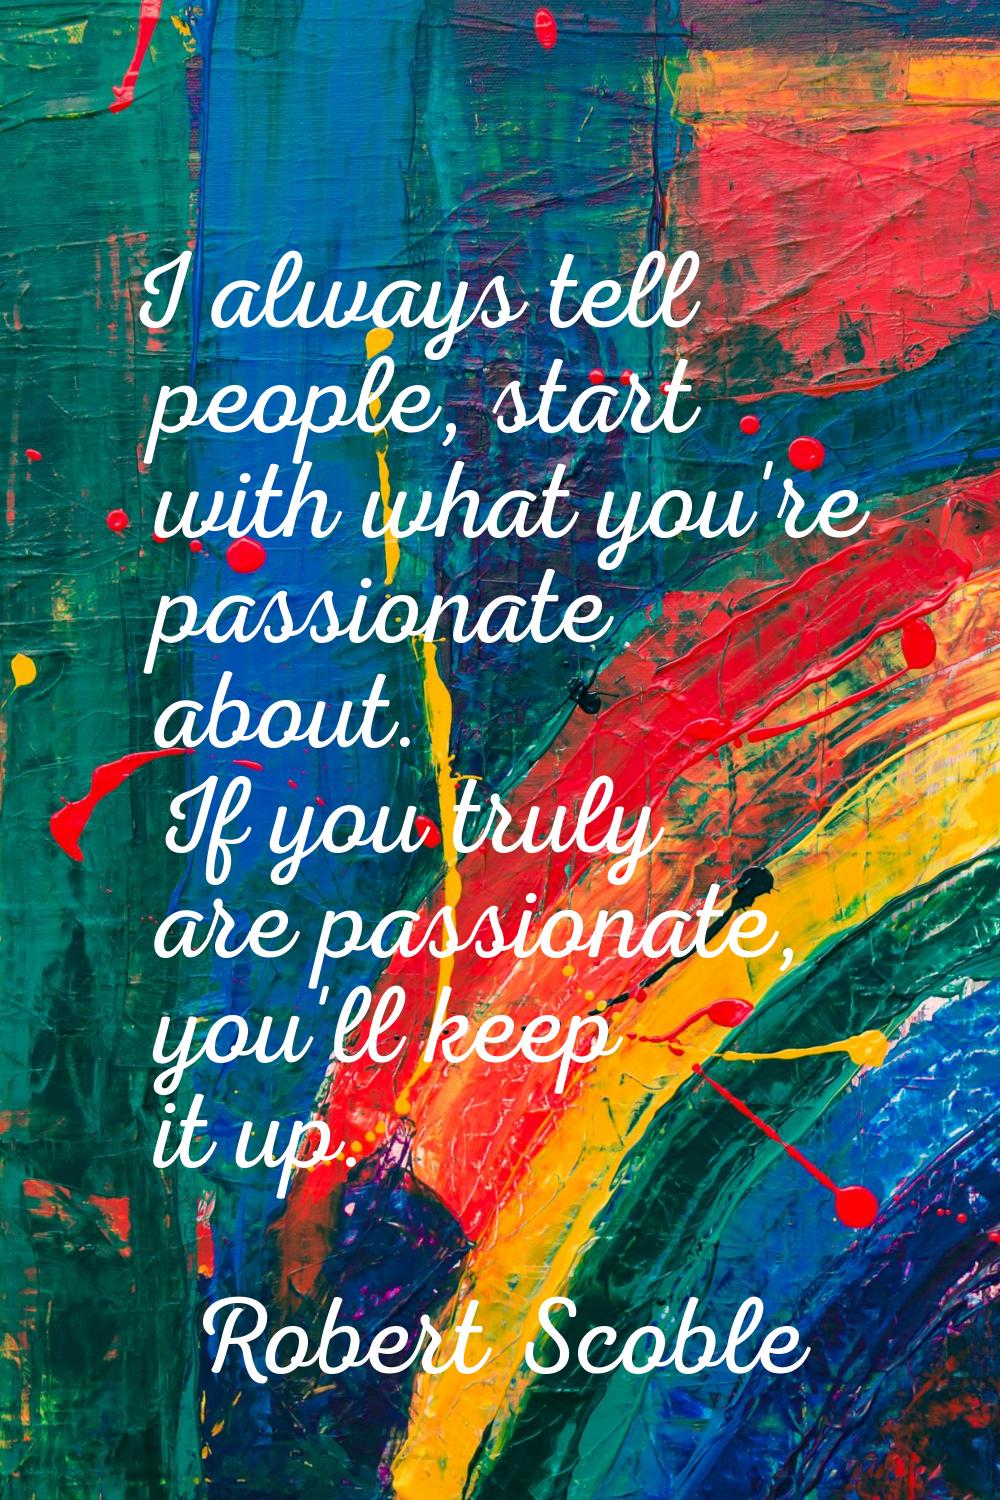 I always tell people, start with what you're passionate about. If you truly are passionate, you'll 